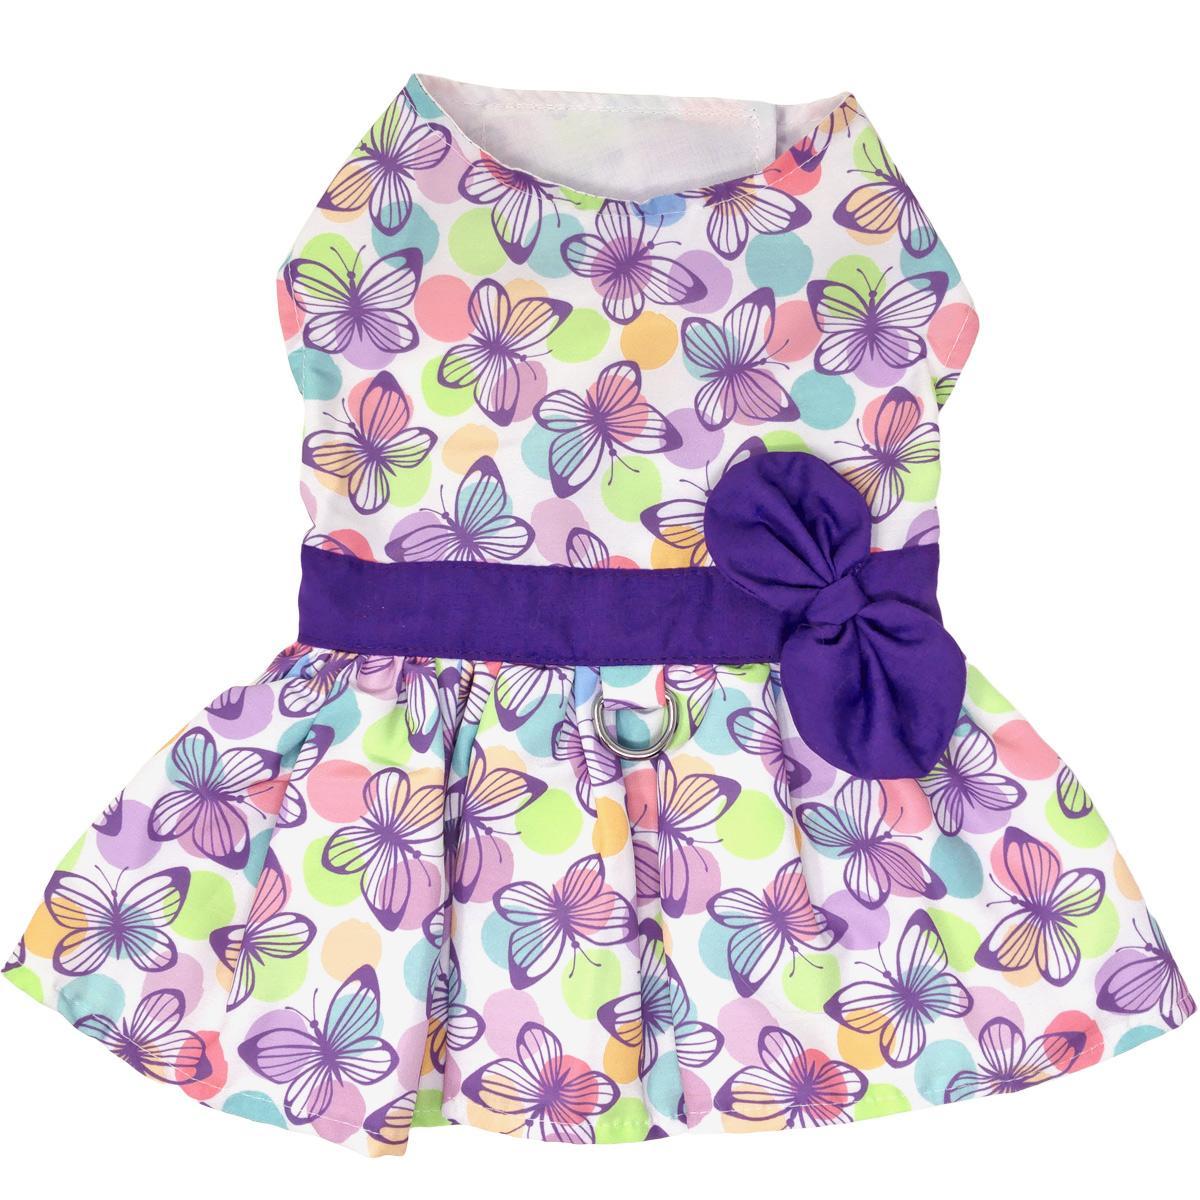 Purple Butterfly Dog Harness Dress with Matching Leash by Doggie Design